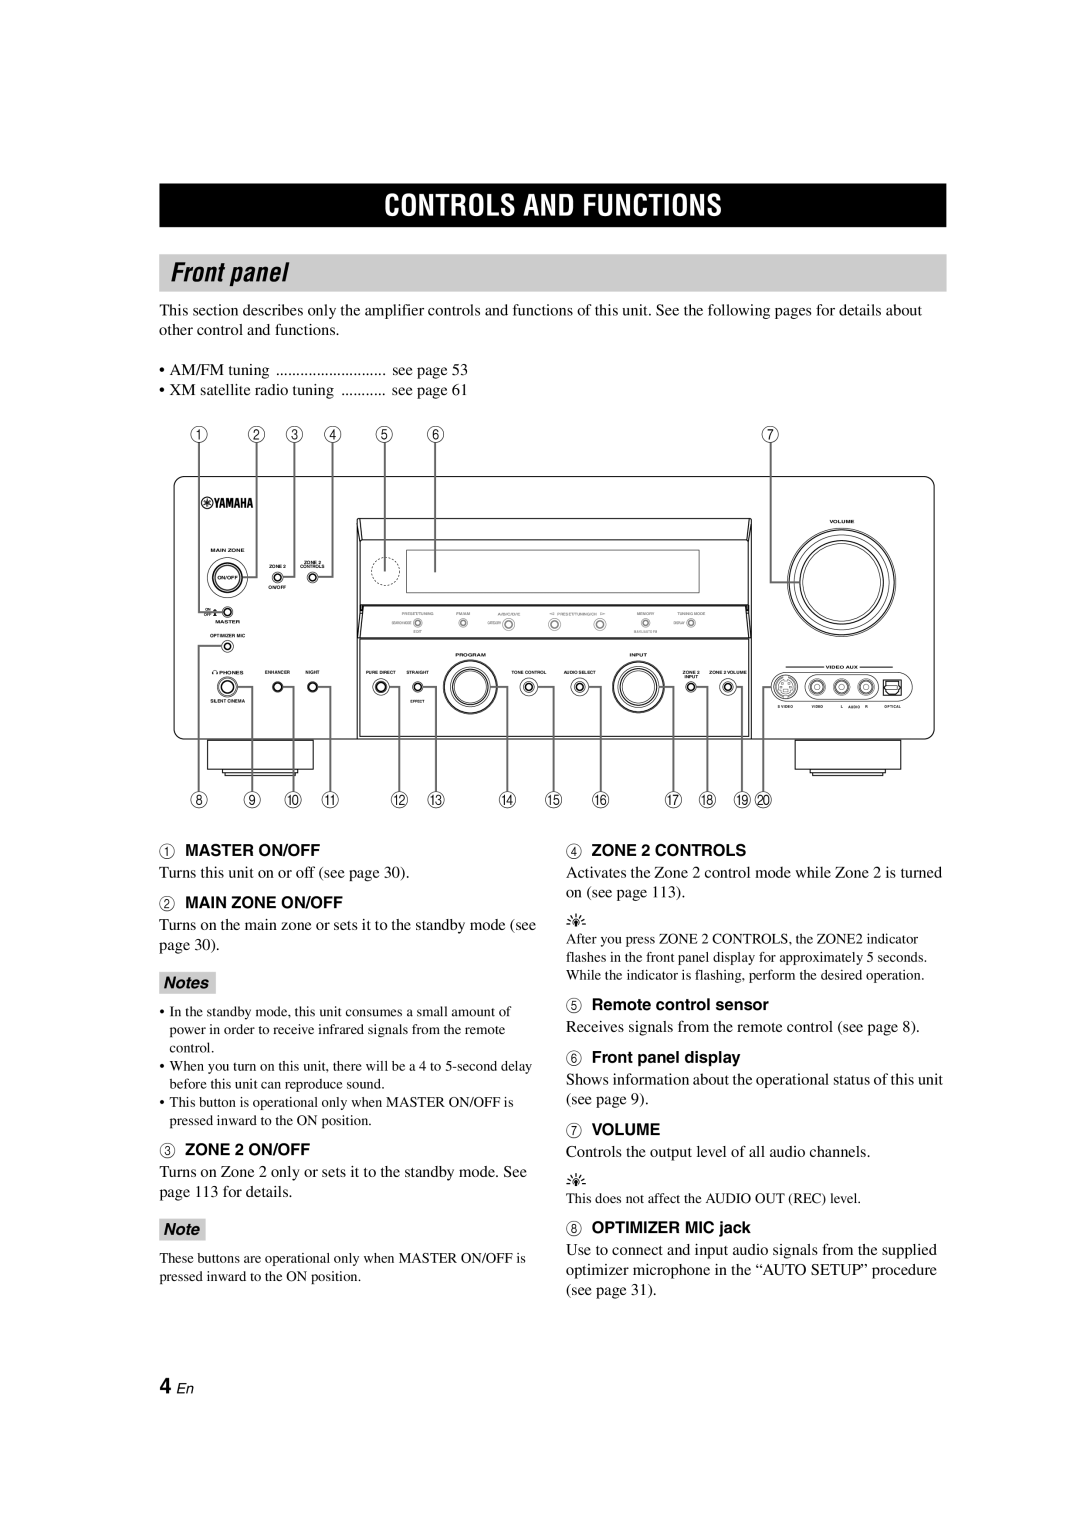 Yamaha HTR-6090 owner manual Controls And Functions, Front panel, 4 En, 8 9 0 A B C D E F G H IJ, Notes 